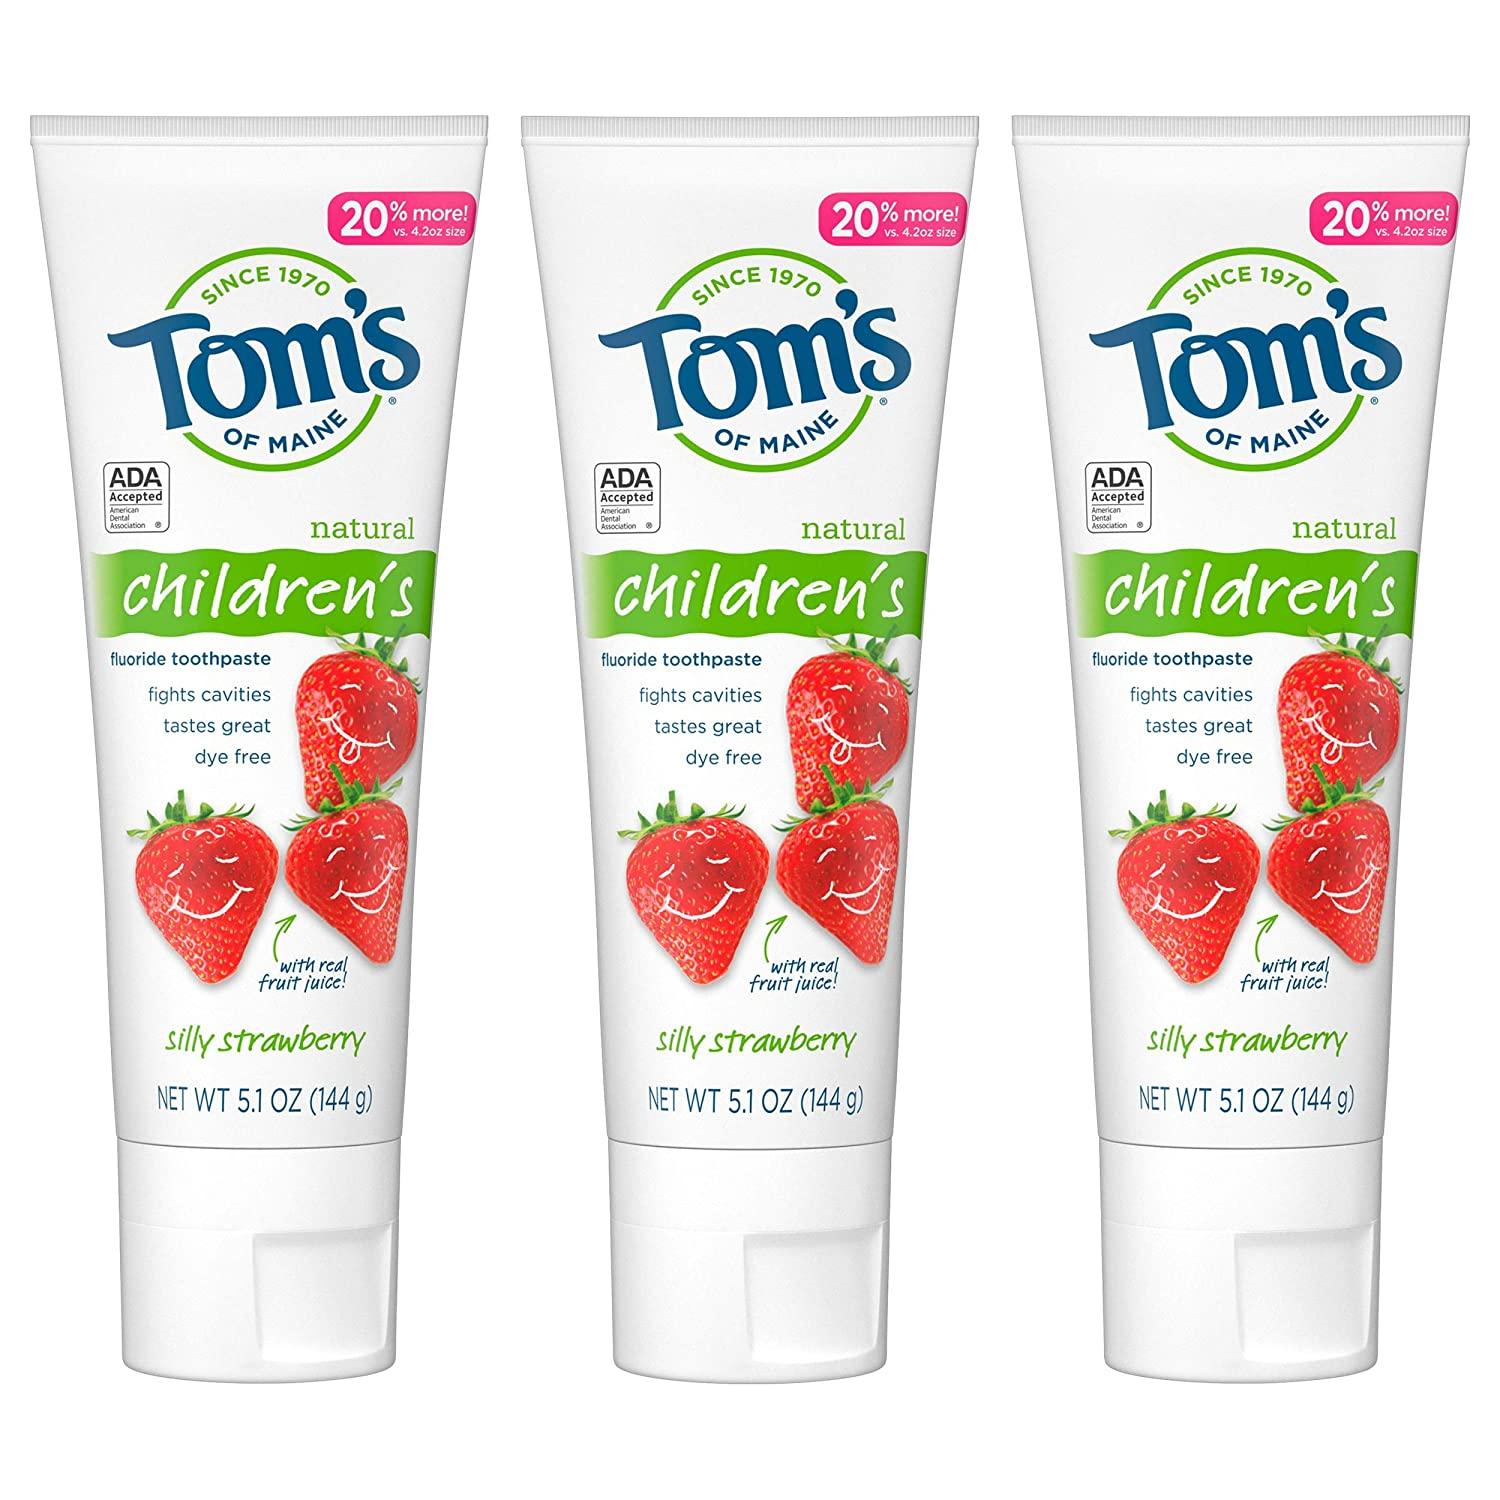 3 Toms of Maine Natural Kids Fluoride Toothpastes for $6.83 Shipped